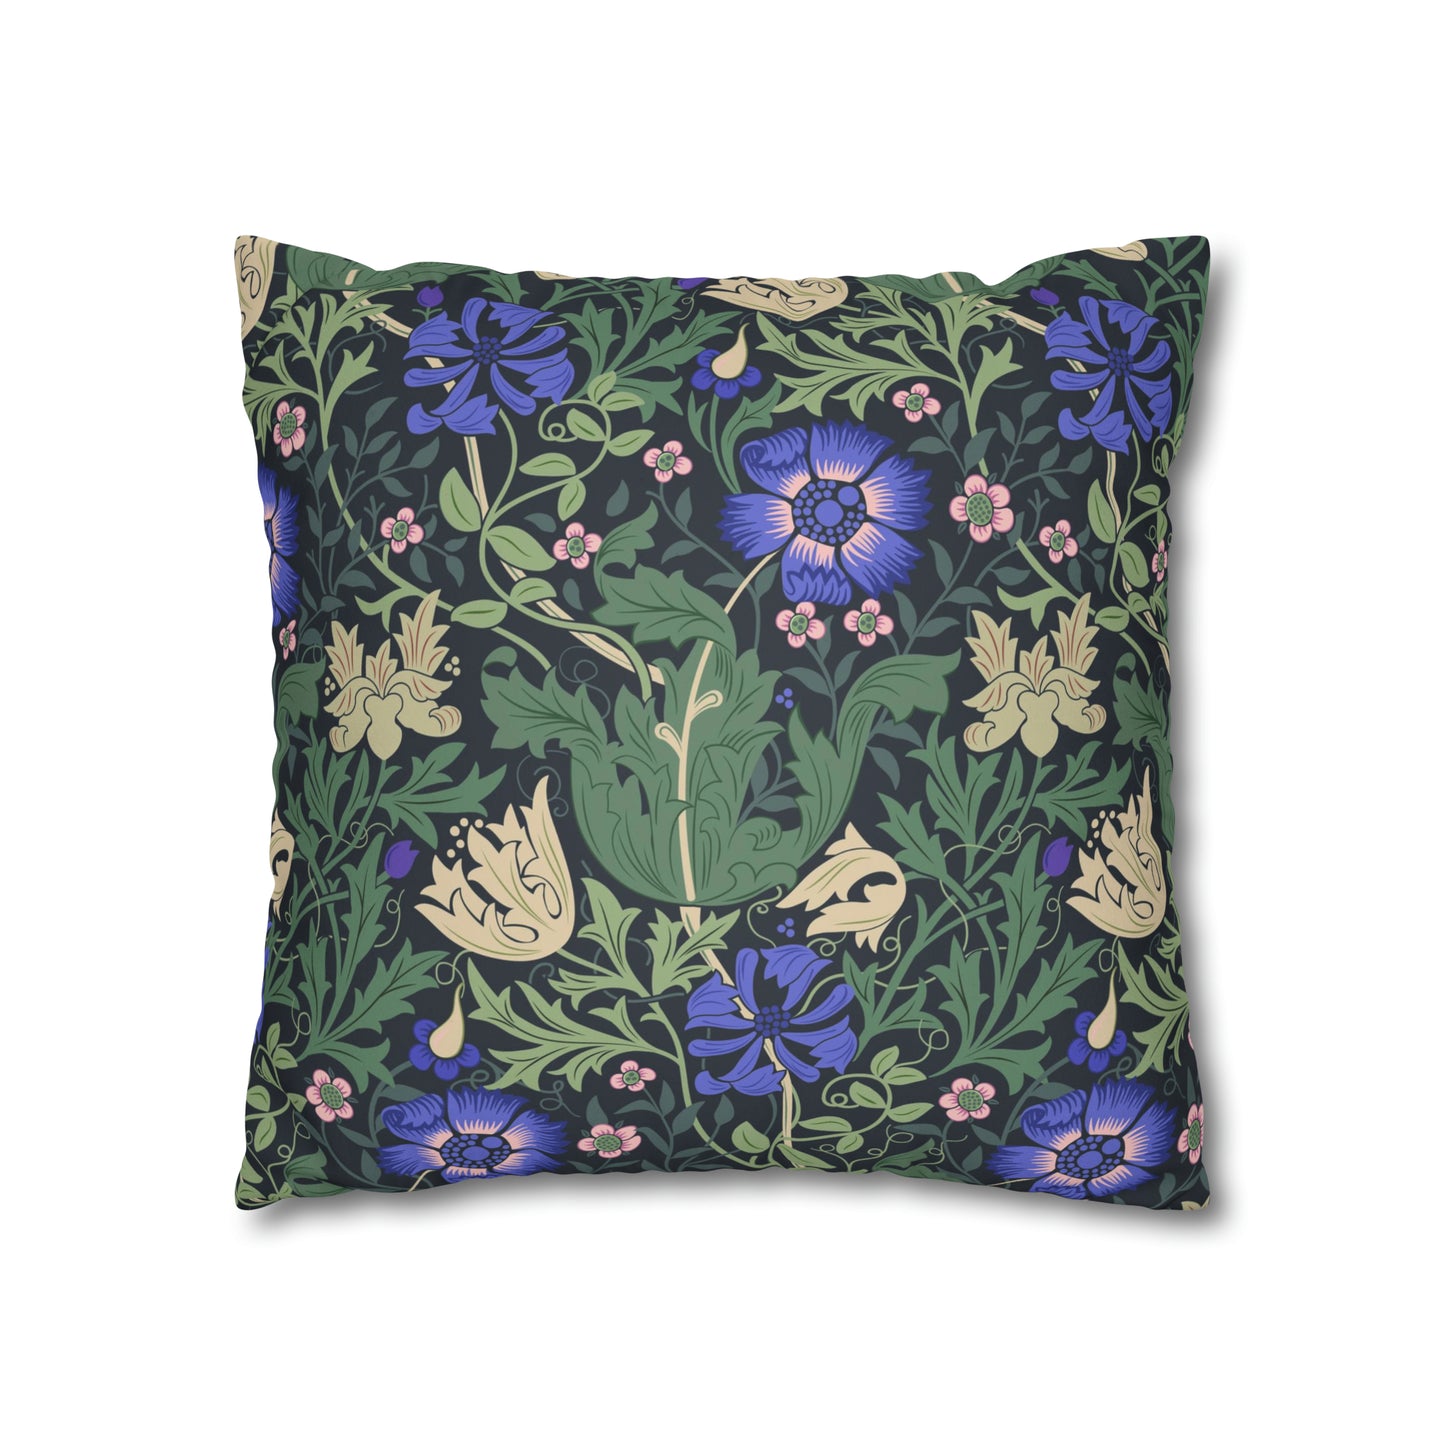 William Morris & Co Faux Suede Cushion Covers - Compton Collection (Bluebell Cottage)